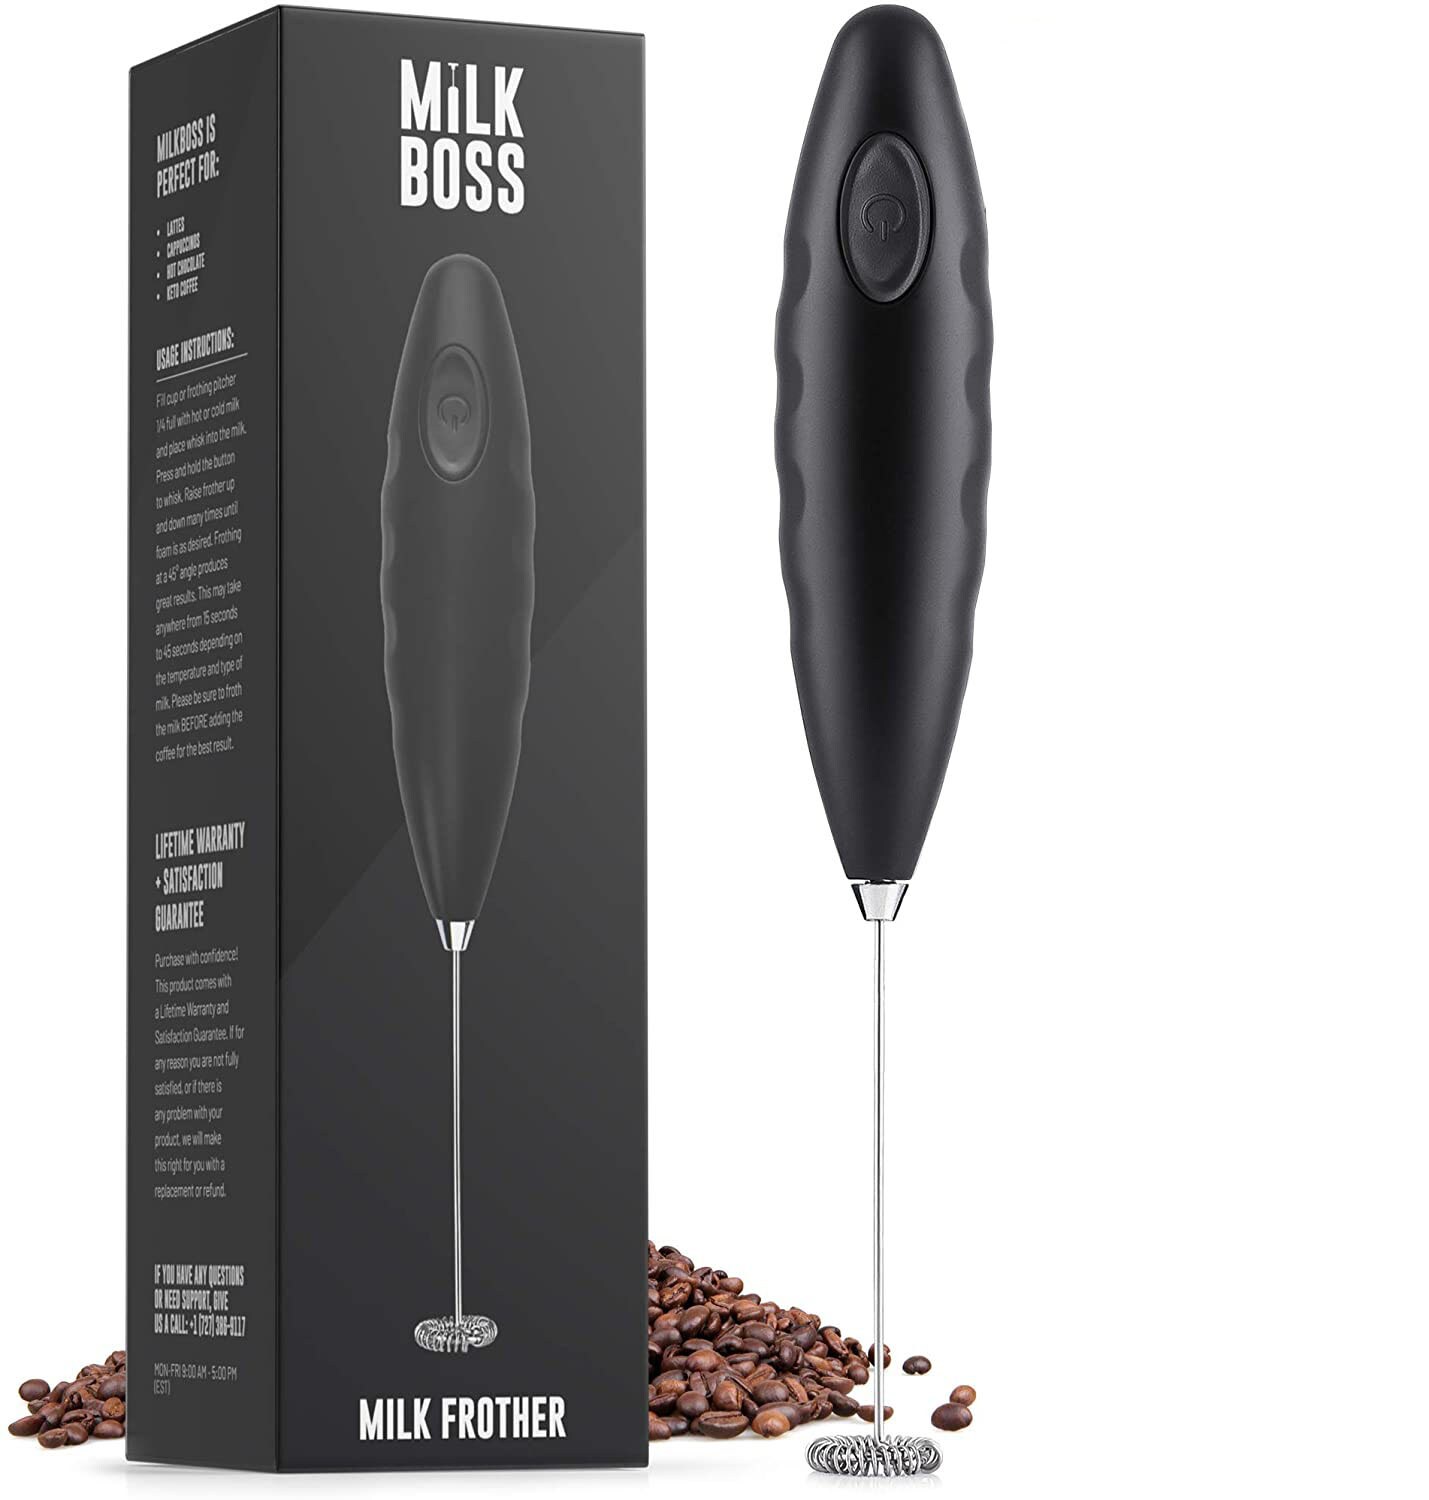 Zulay Kitchen MB Milk Frother Double Grip 14,000 RPM No Stand